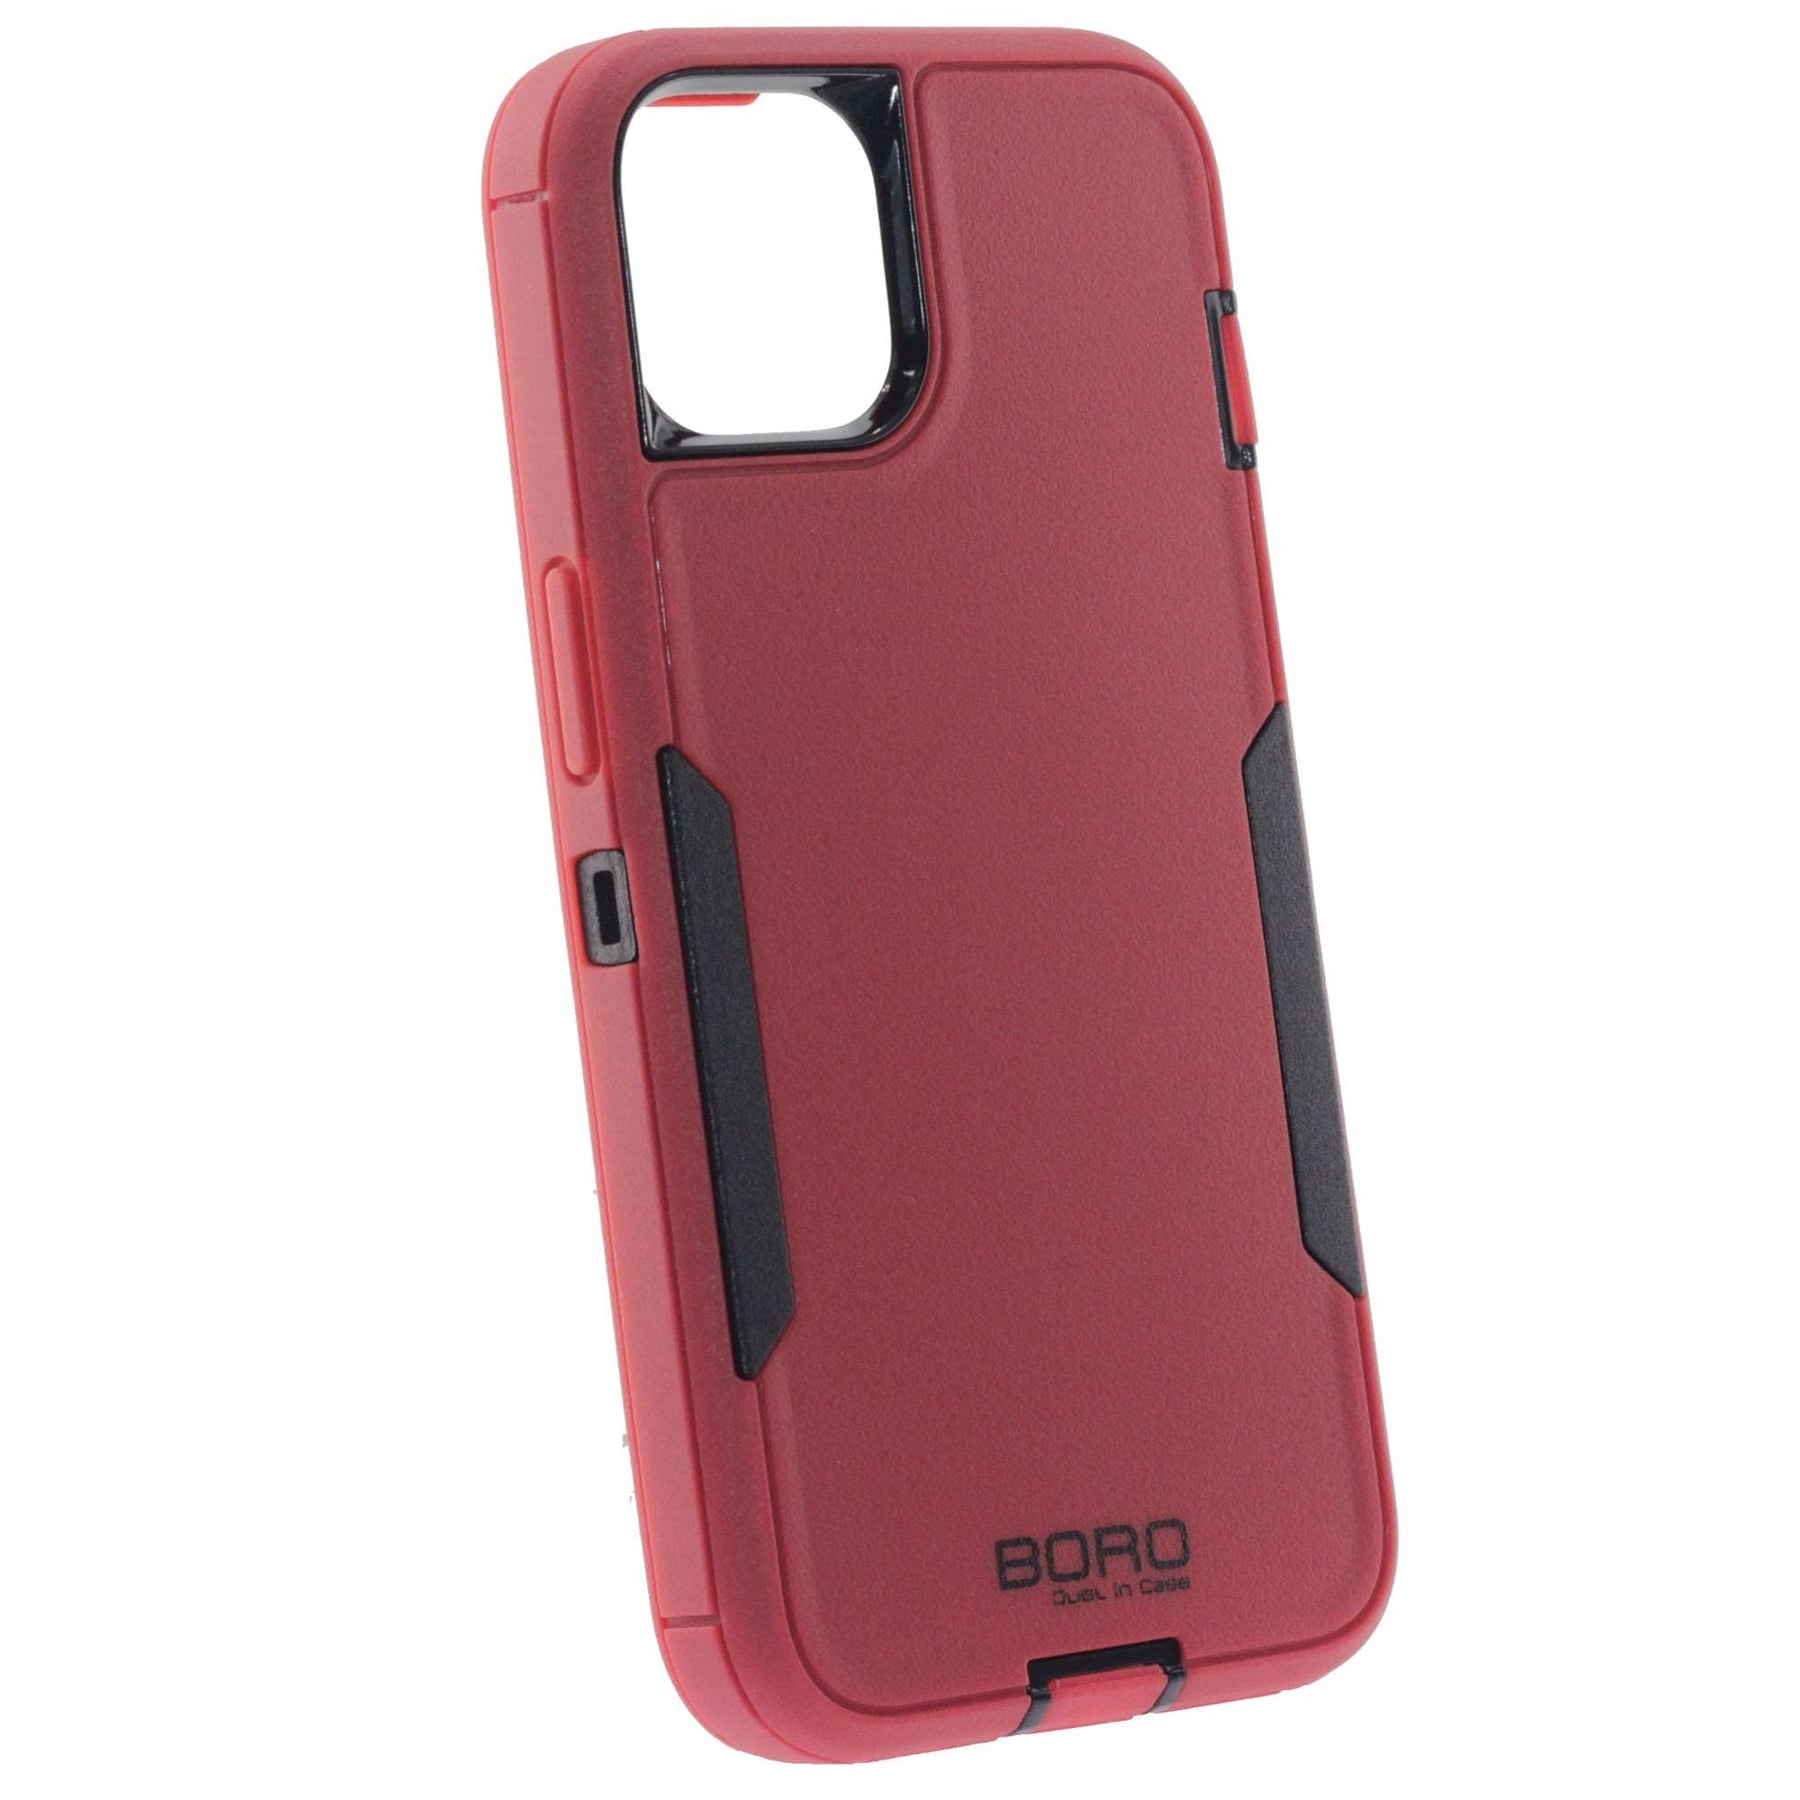 Apple iPhone 12/12 Pro, Armor Case, Color Red